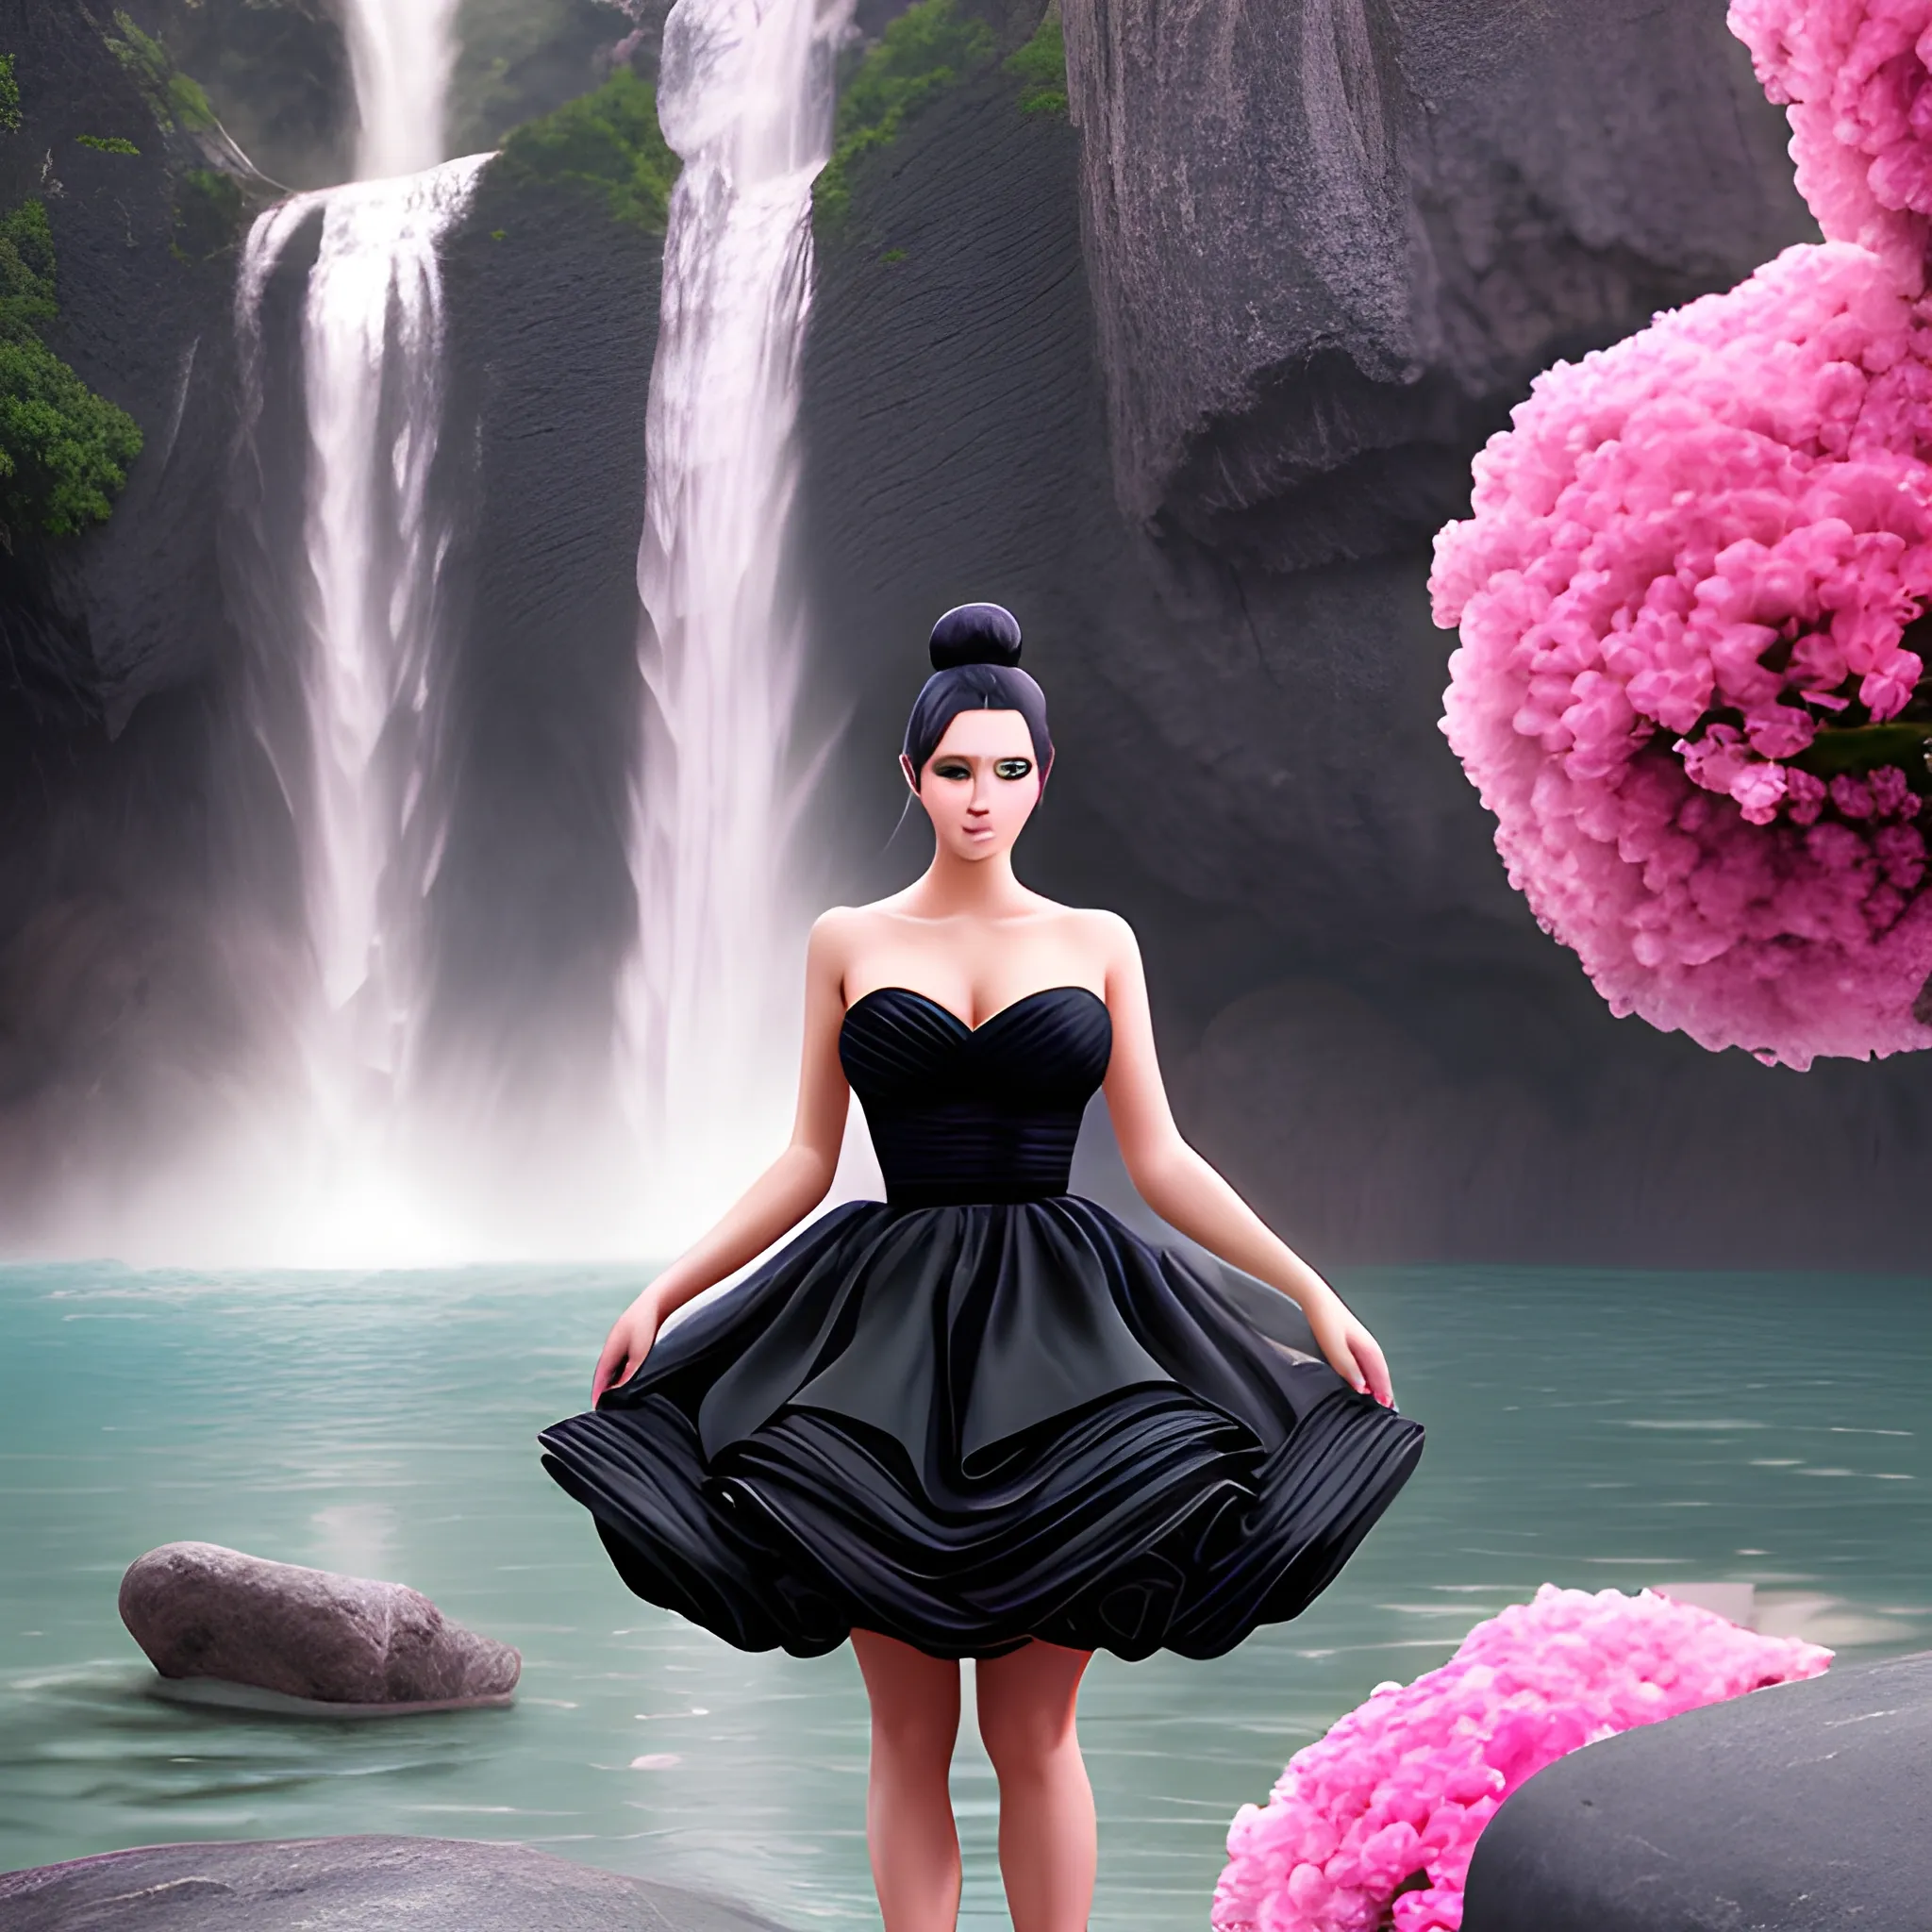 Very beautiful woman, black hair, bun hair, sexy pink 
dress, standing on big stone, pink roses, romanticism, high detail, 8K resolution, ultra high definition picture, 1 waterfall background